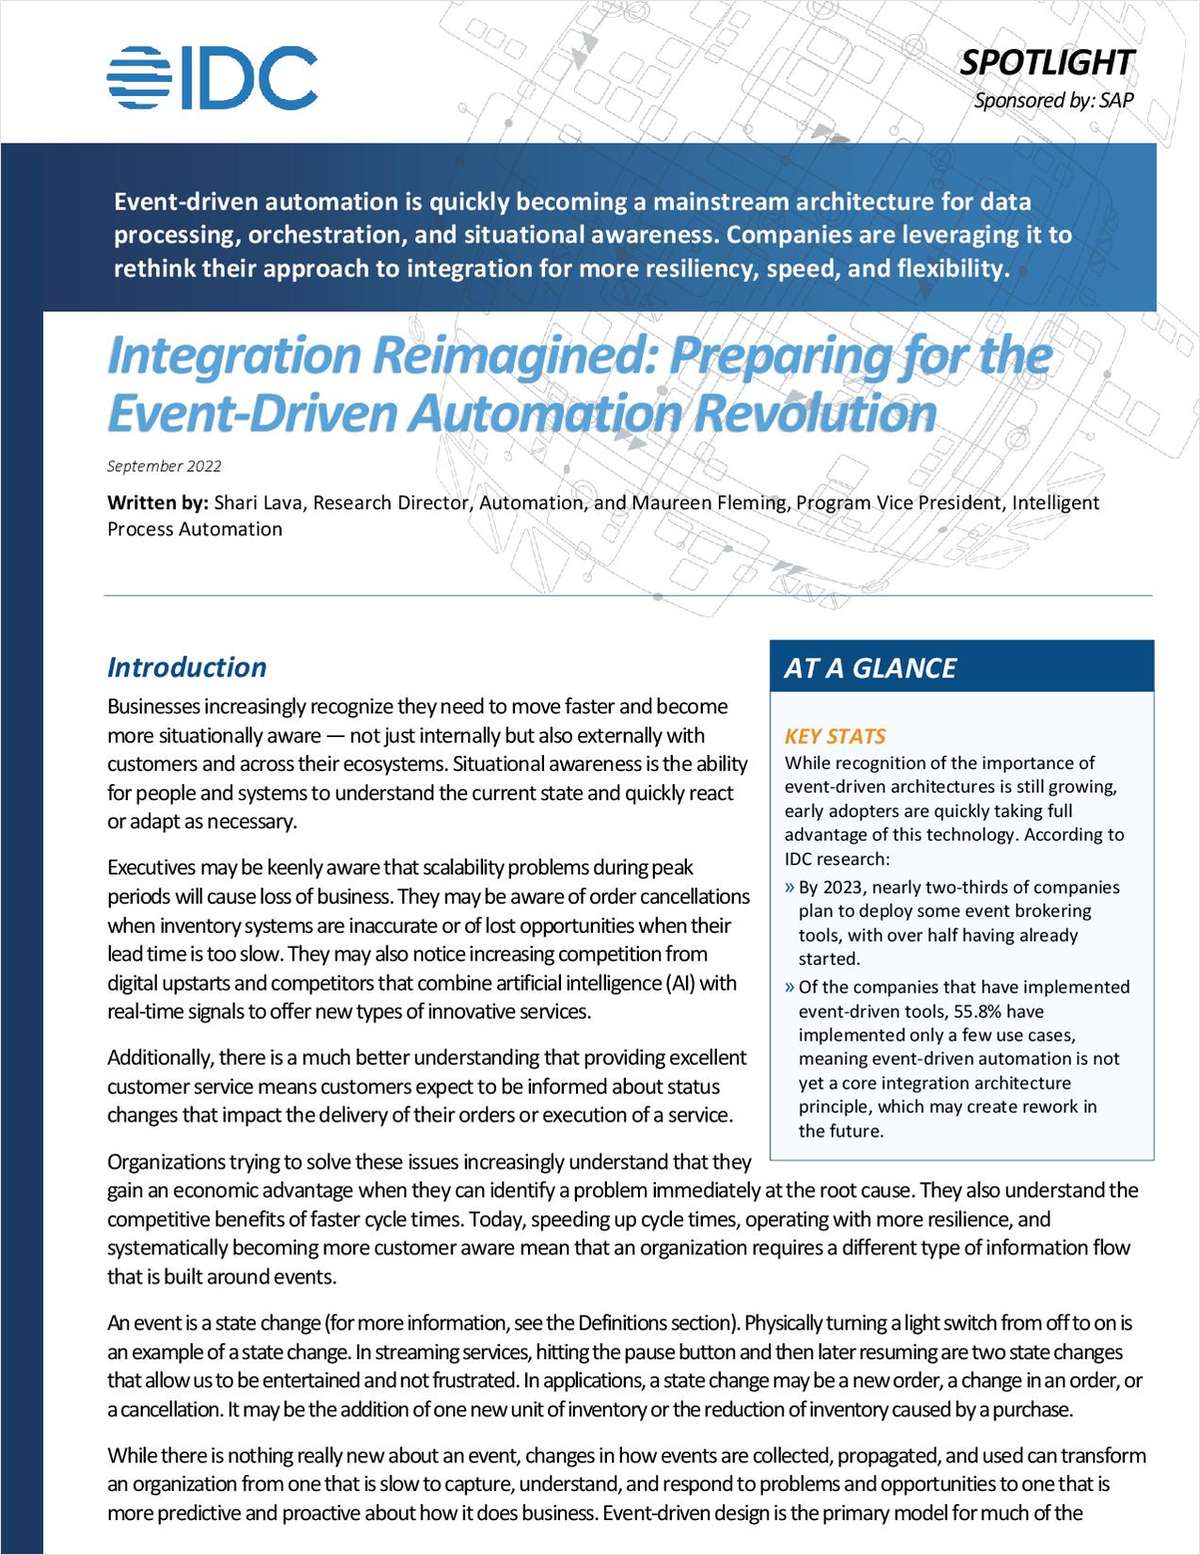 Integration Reimagined: Preparing for the Event-Driven Automation Revolution